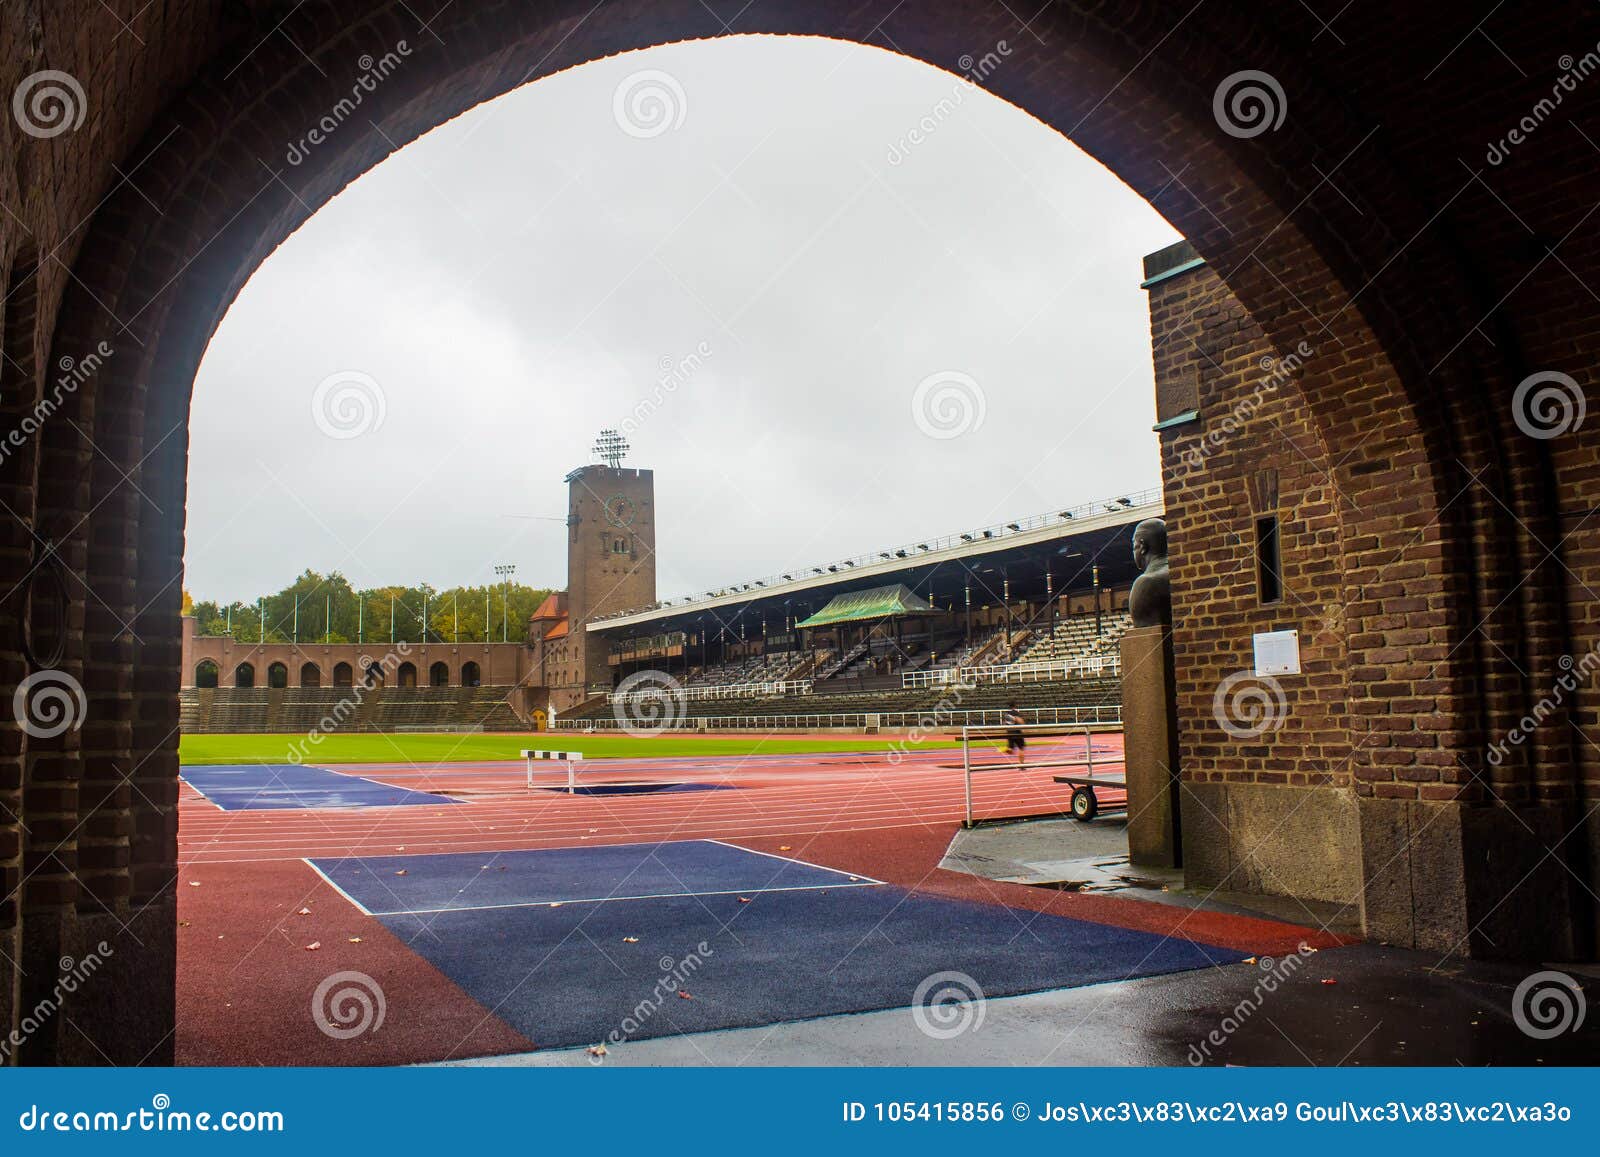 stockholm olympic stadium: partial view from the marathon gate